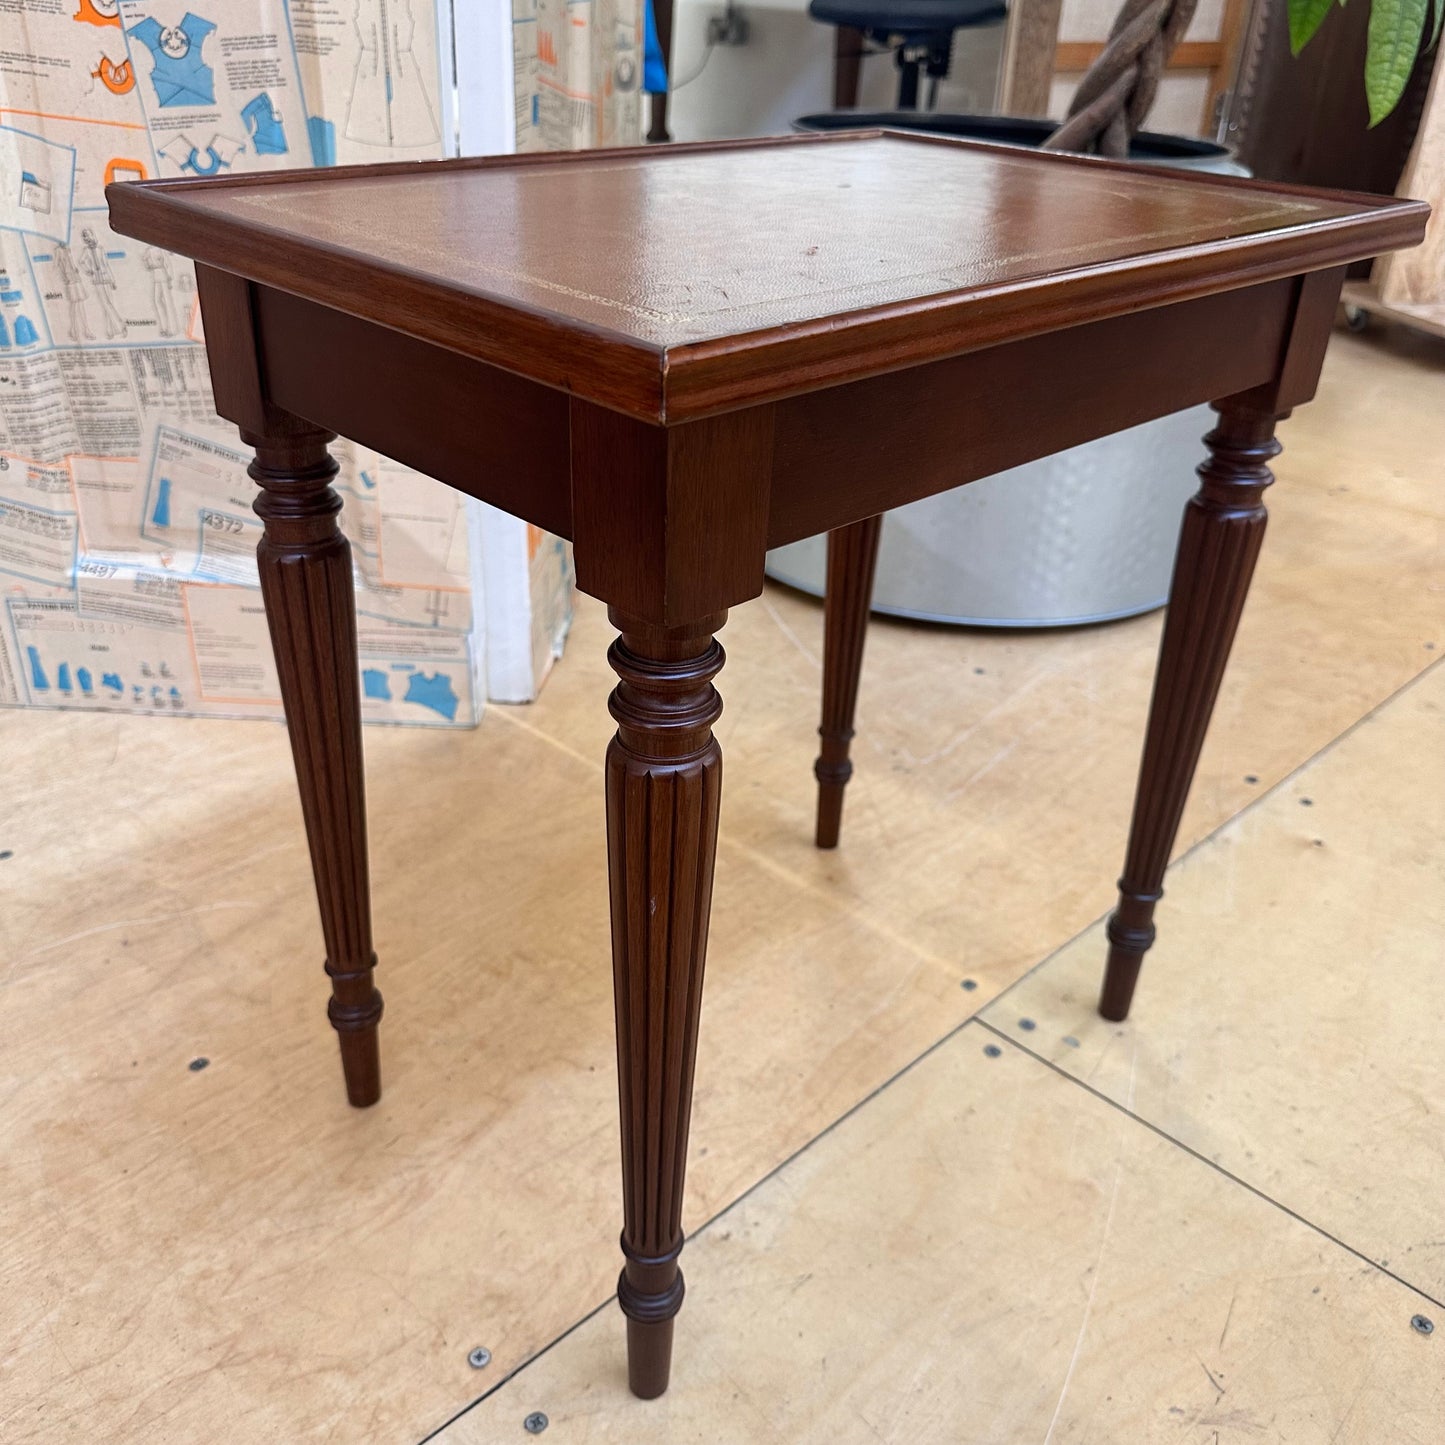 Second Life Furniture - Mahogany Side Table, Leather Topped